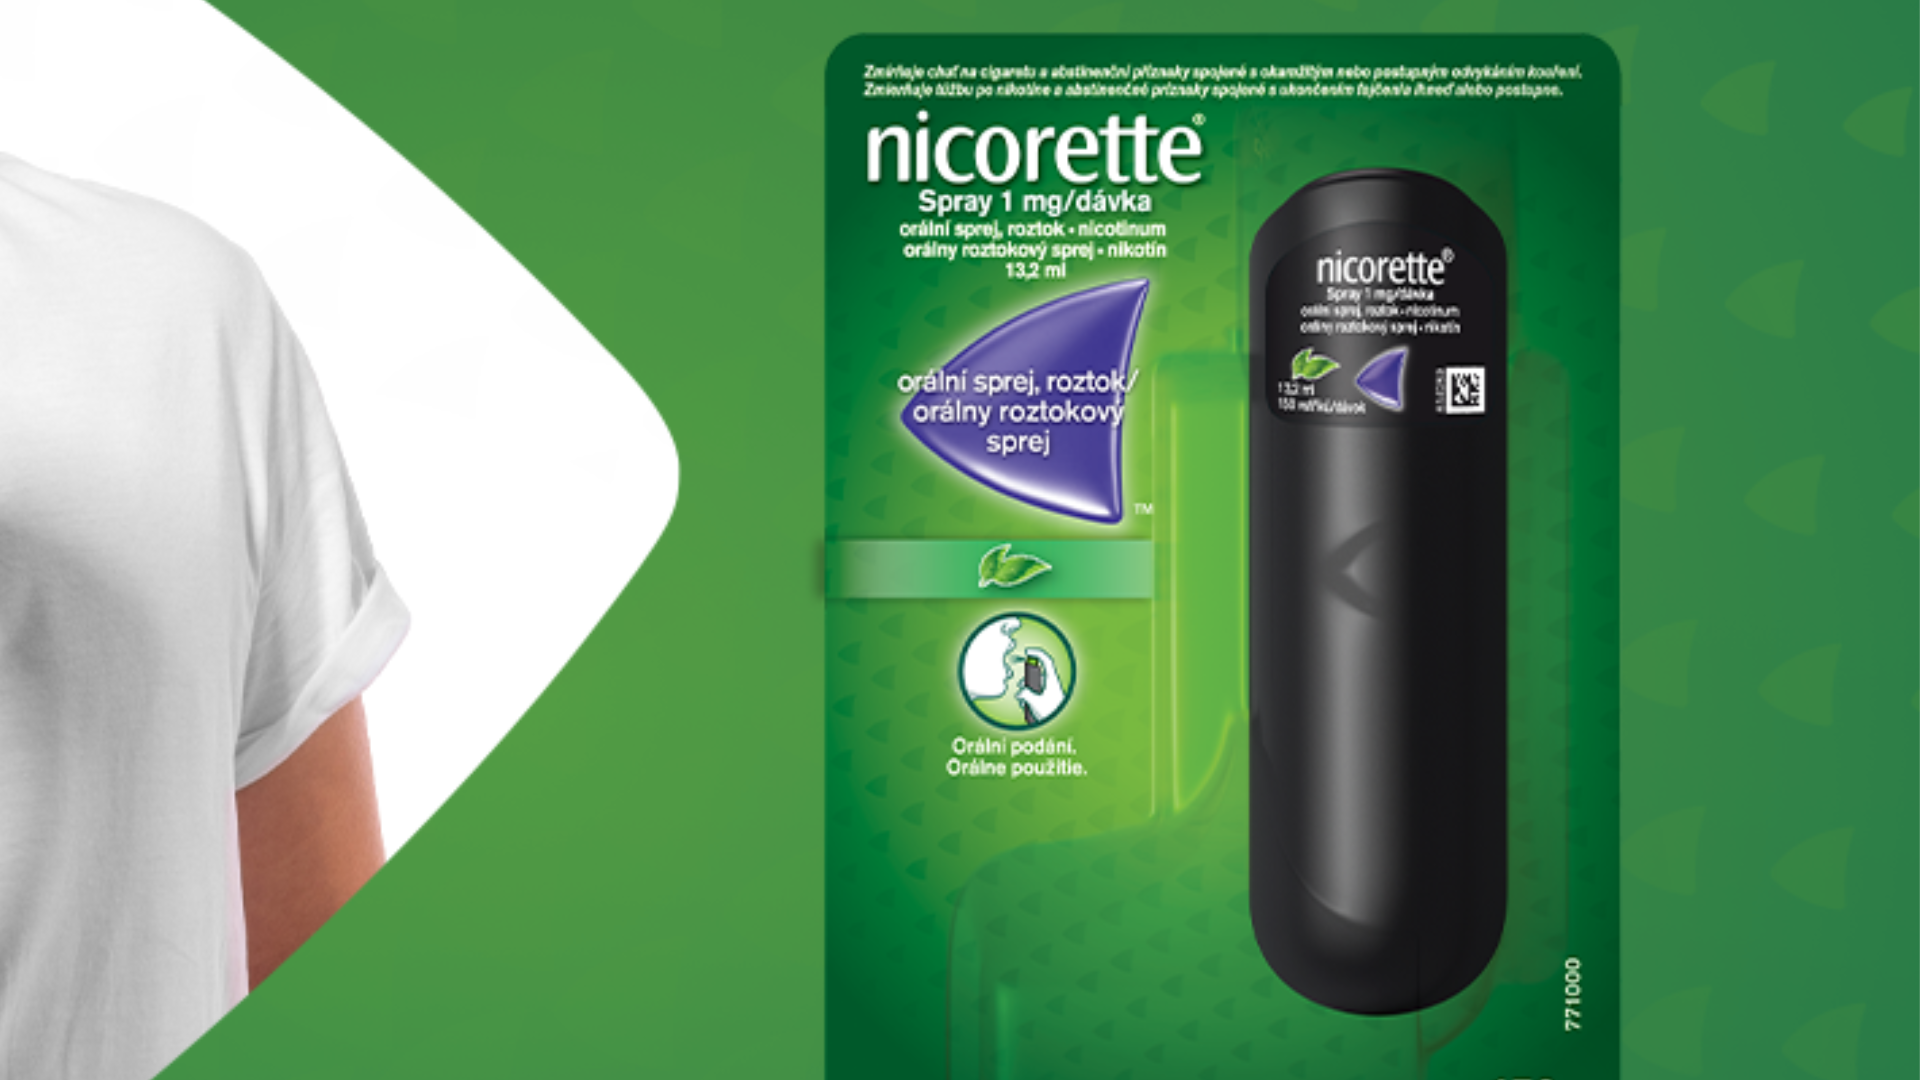 Nicorette - Advertising spot for nicotine patches and spray